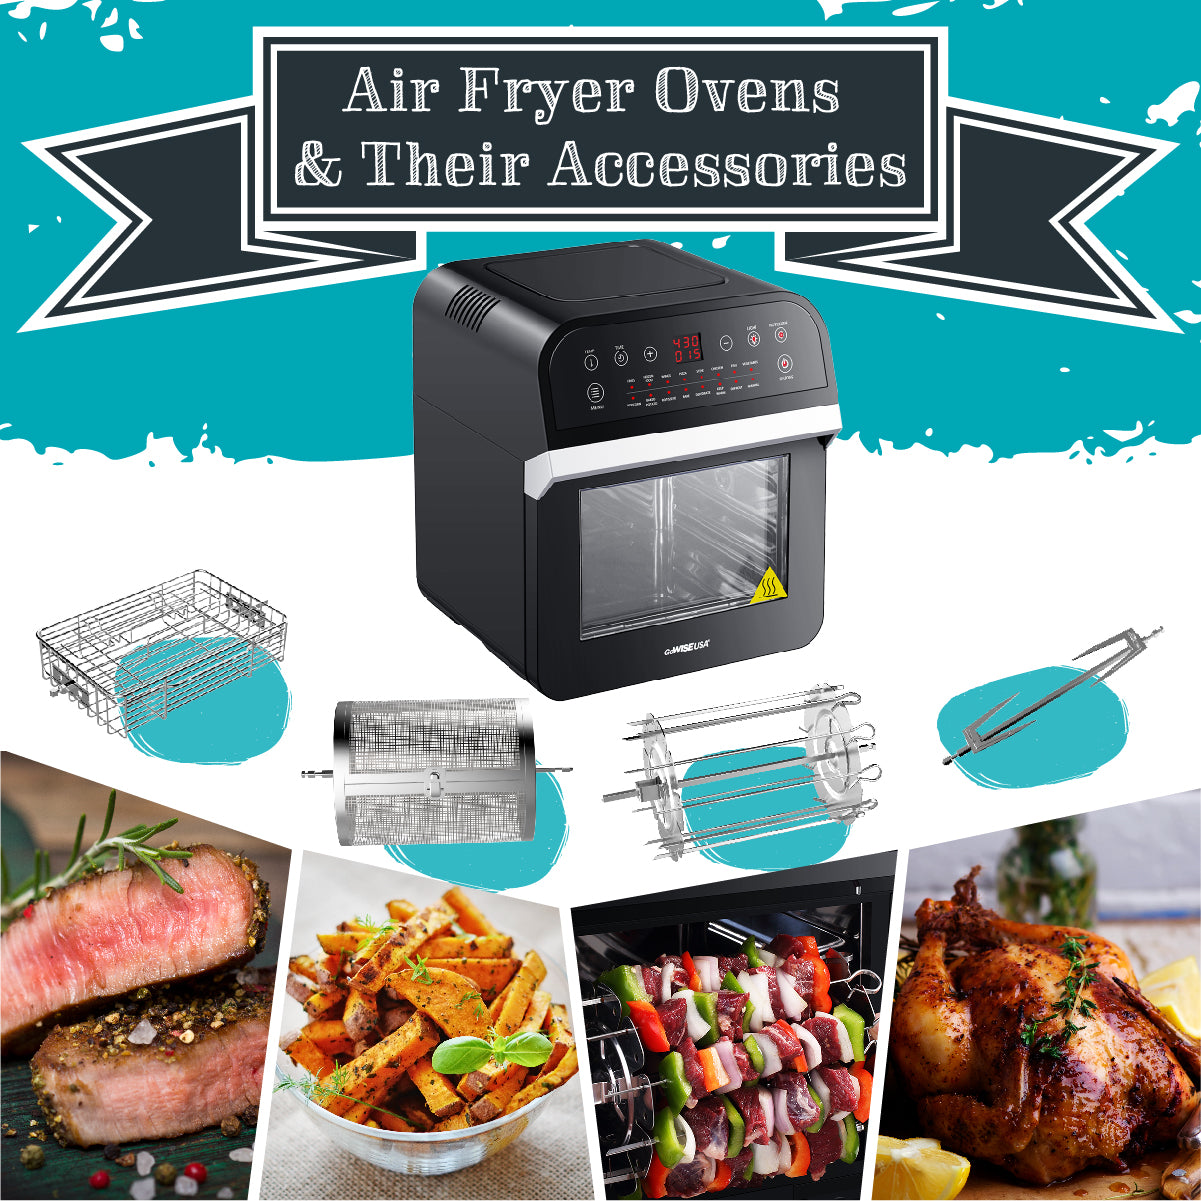 Air Fryer Ovens & Their Accessories